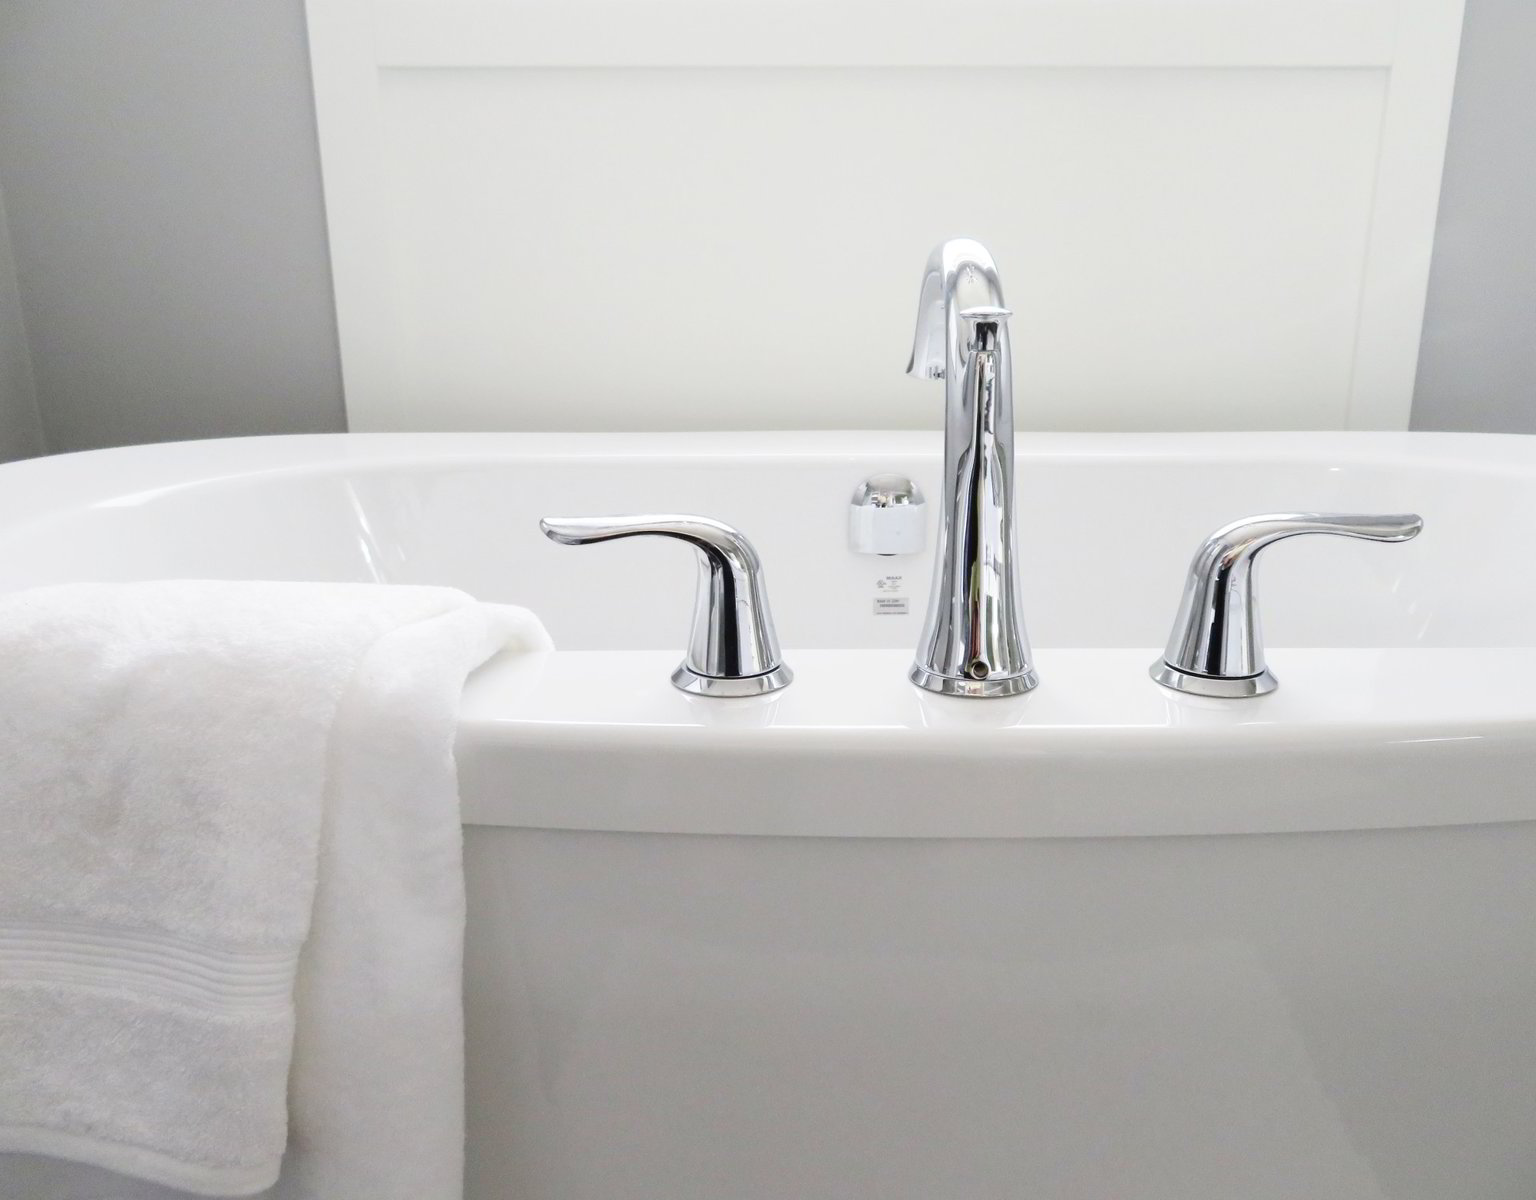 How To Fix A Leaky Bathtub Faucet, Bathtub Faucet Washer Replacement